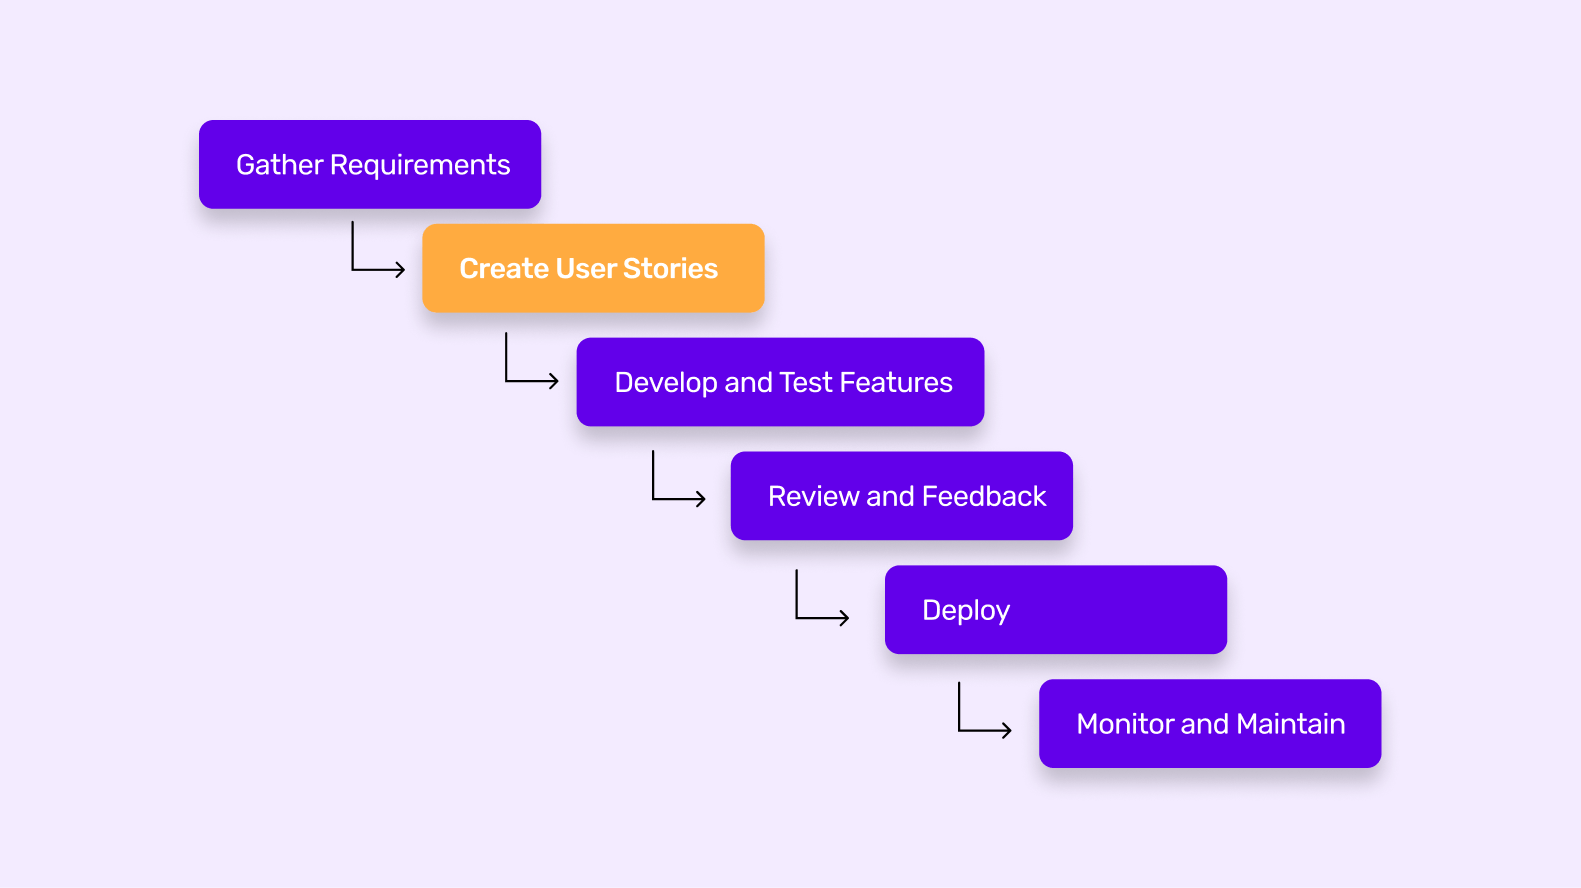 An app story creation flow highlights the stages involved in creating an app story